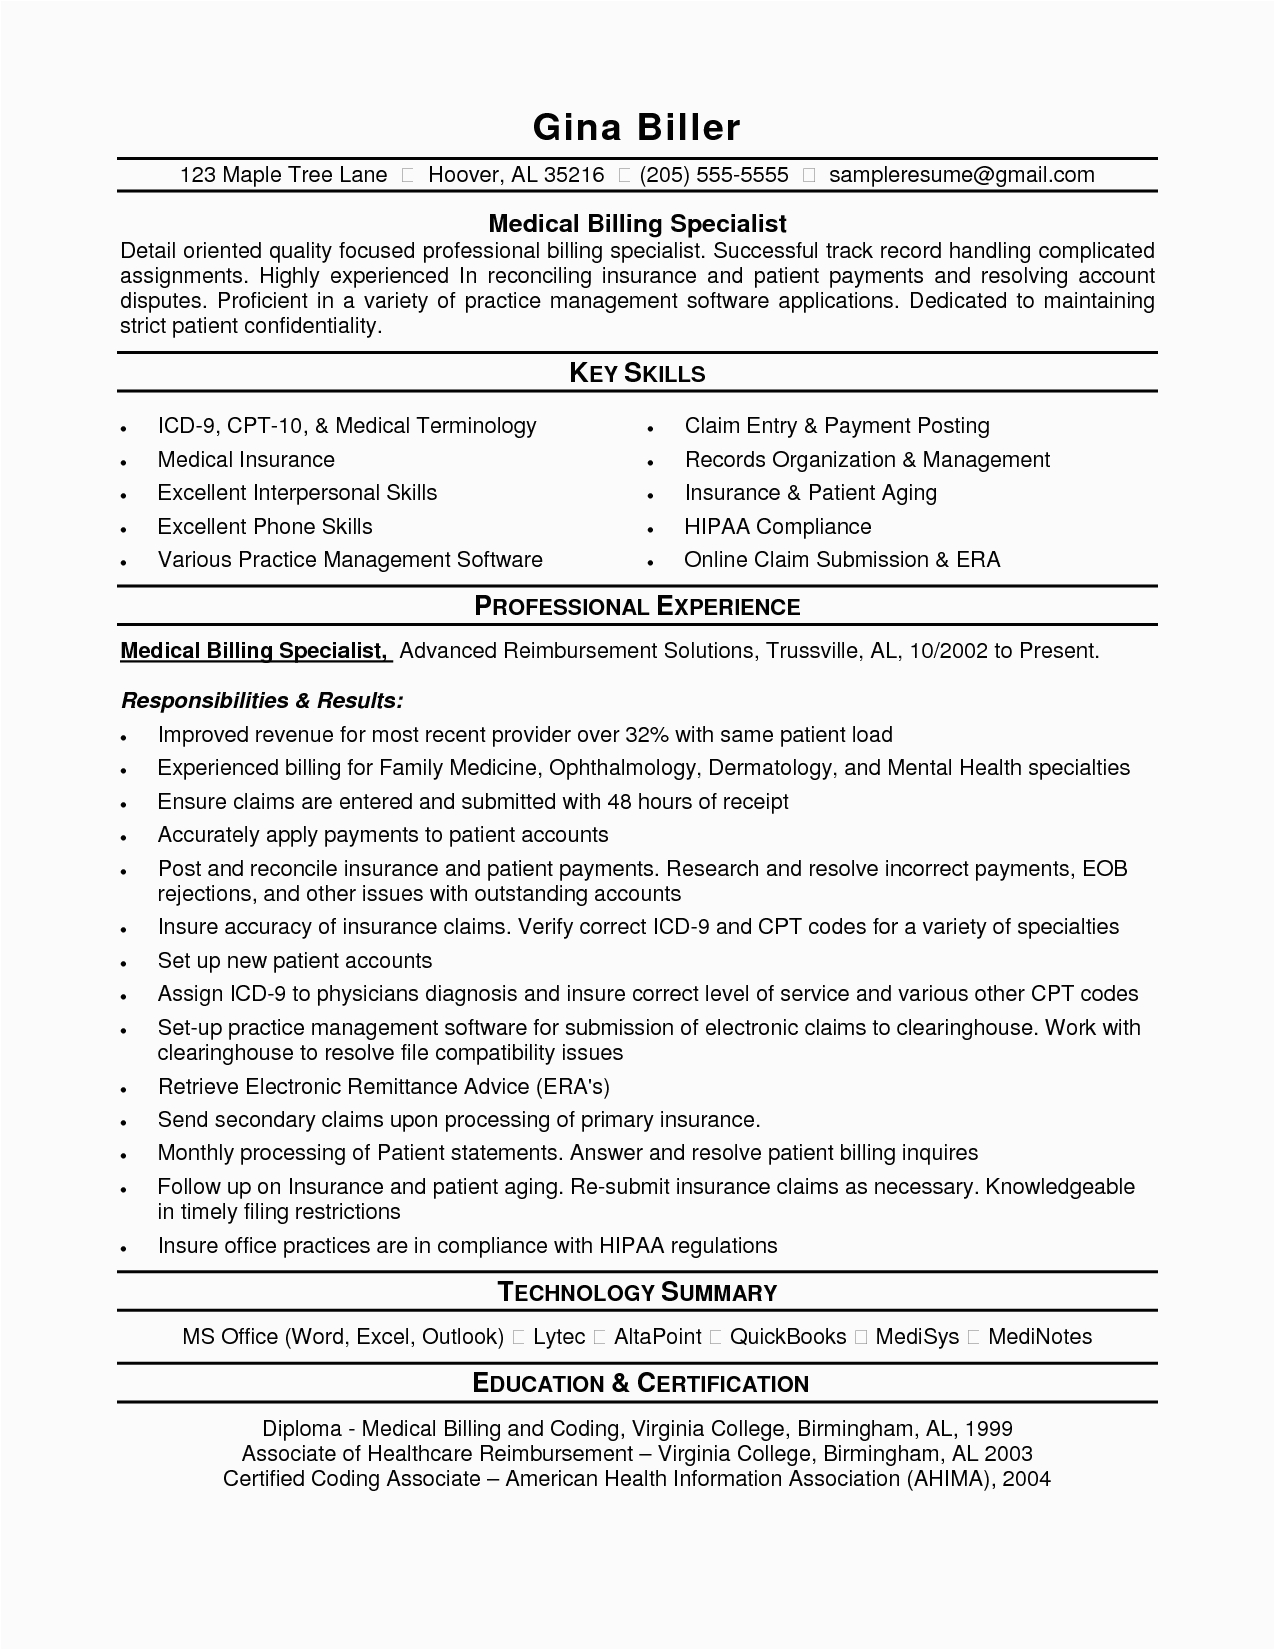 Sample Resume for Coding and Billing Resume Templates for Medical Billing and Coding Resmud